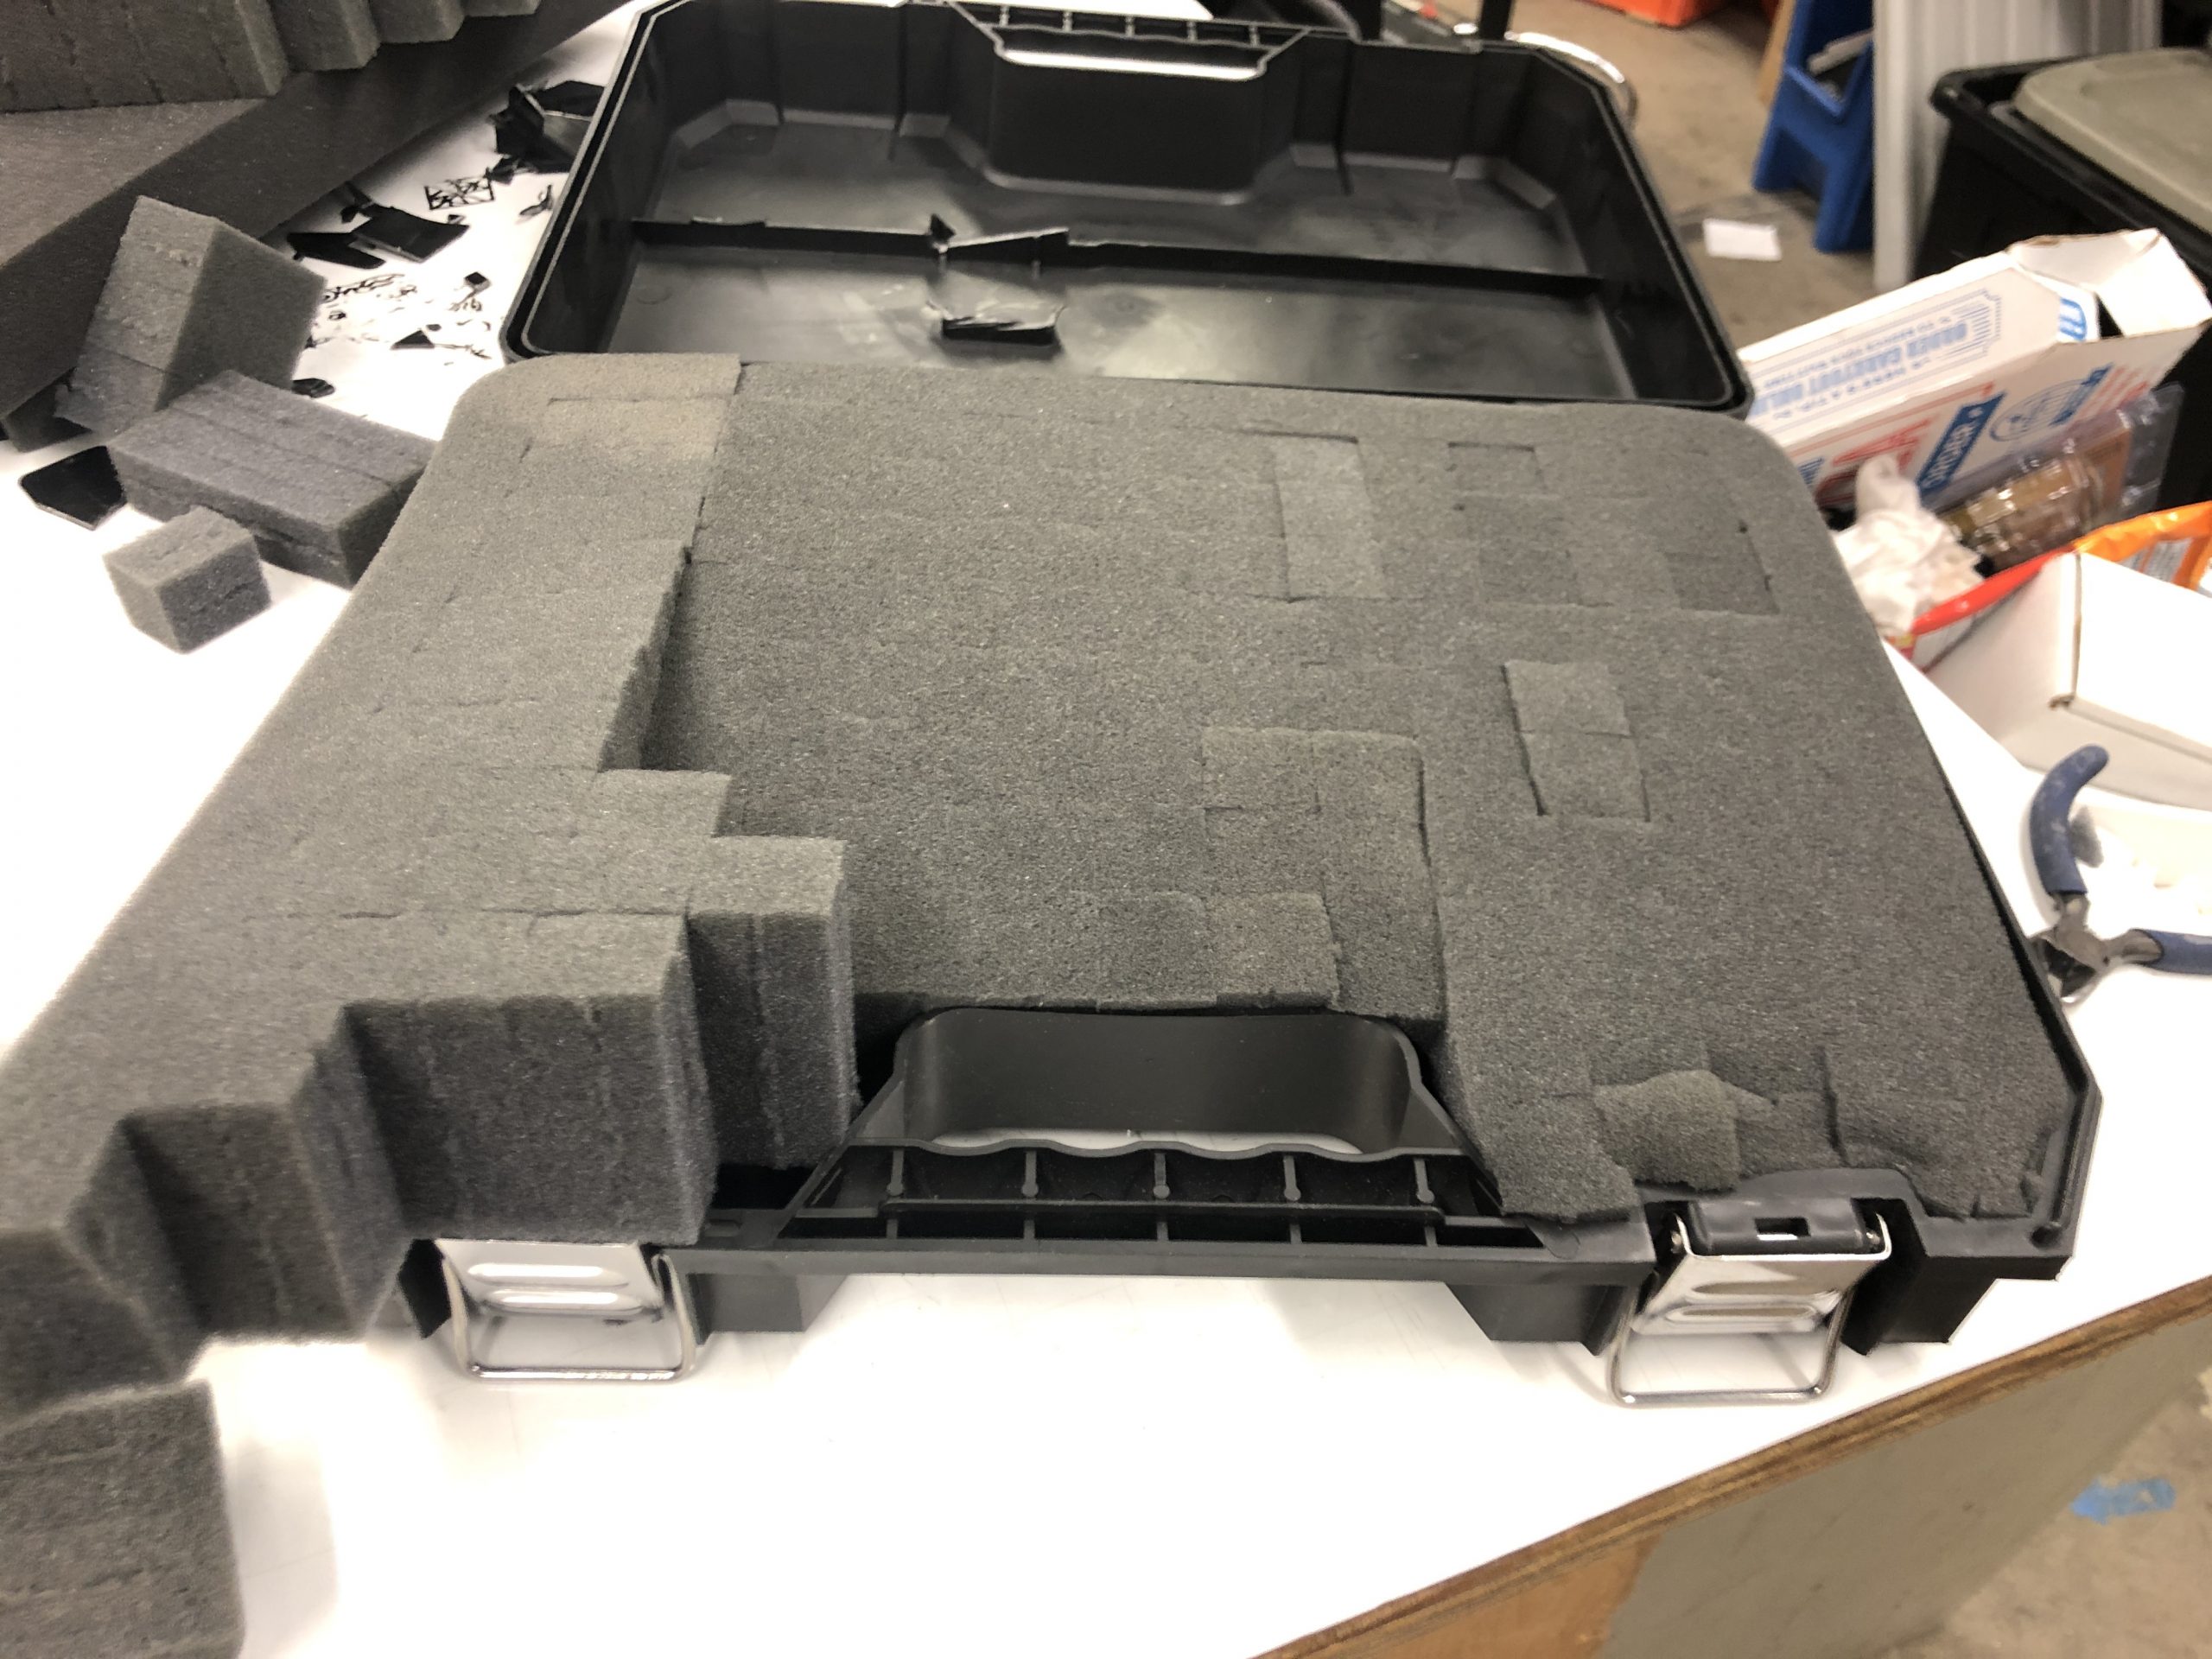 Prepping the foam to fit into the case. I had to cut down much of the foam for it to even go in the bounds, and even then it looked a bit patchy. 